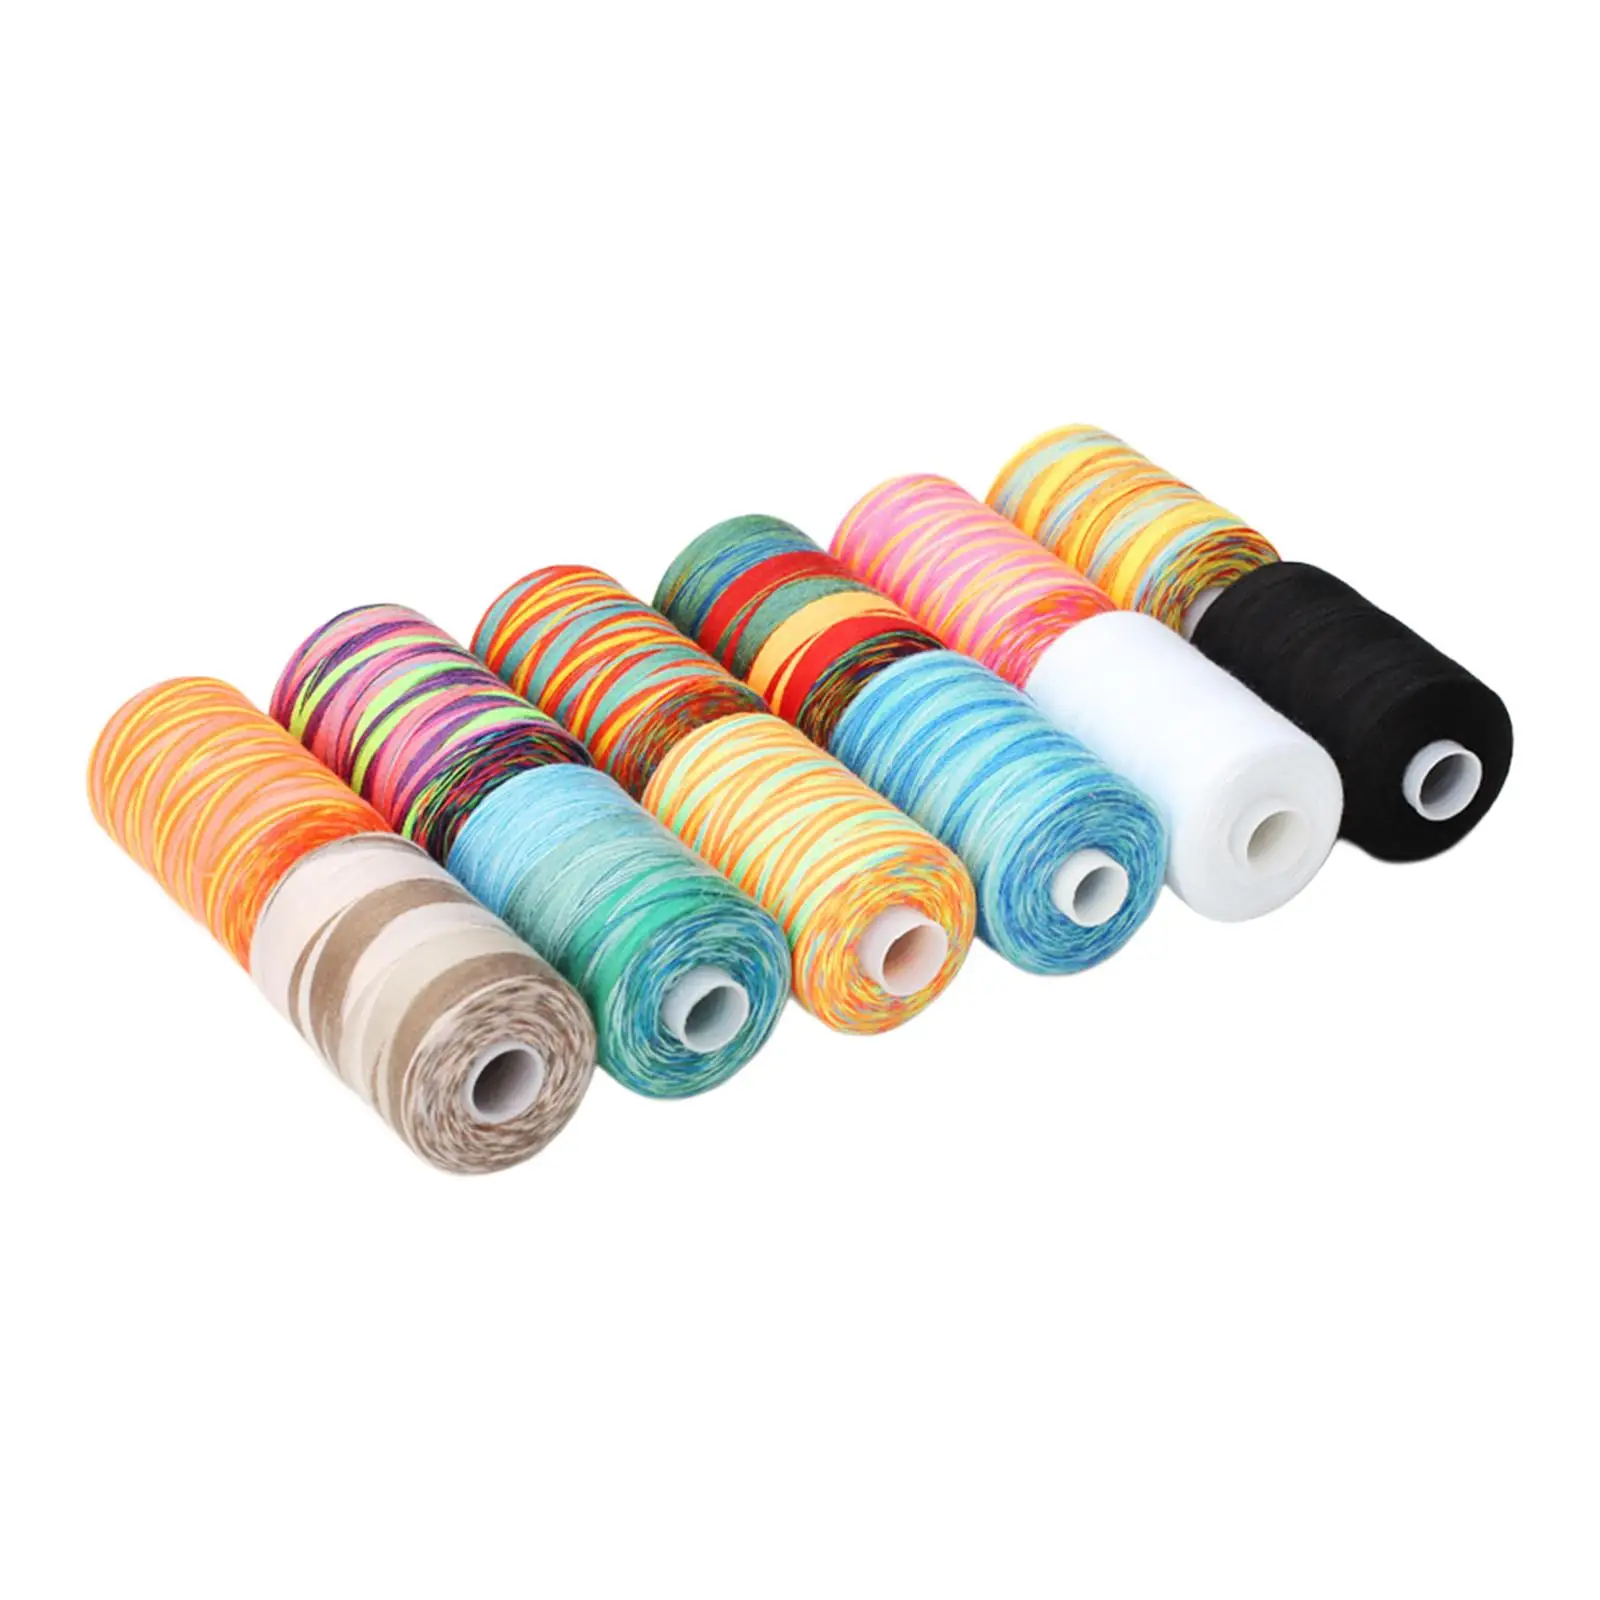 12 Pieces Multicolor Sewing Thread Set Multi Purpose Polyester Thread Spools for Cross Stitching Sewing Quilting Supplies